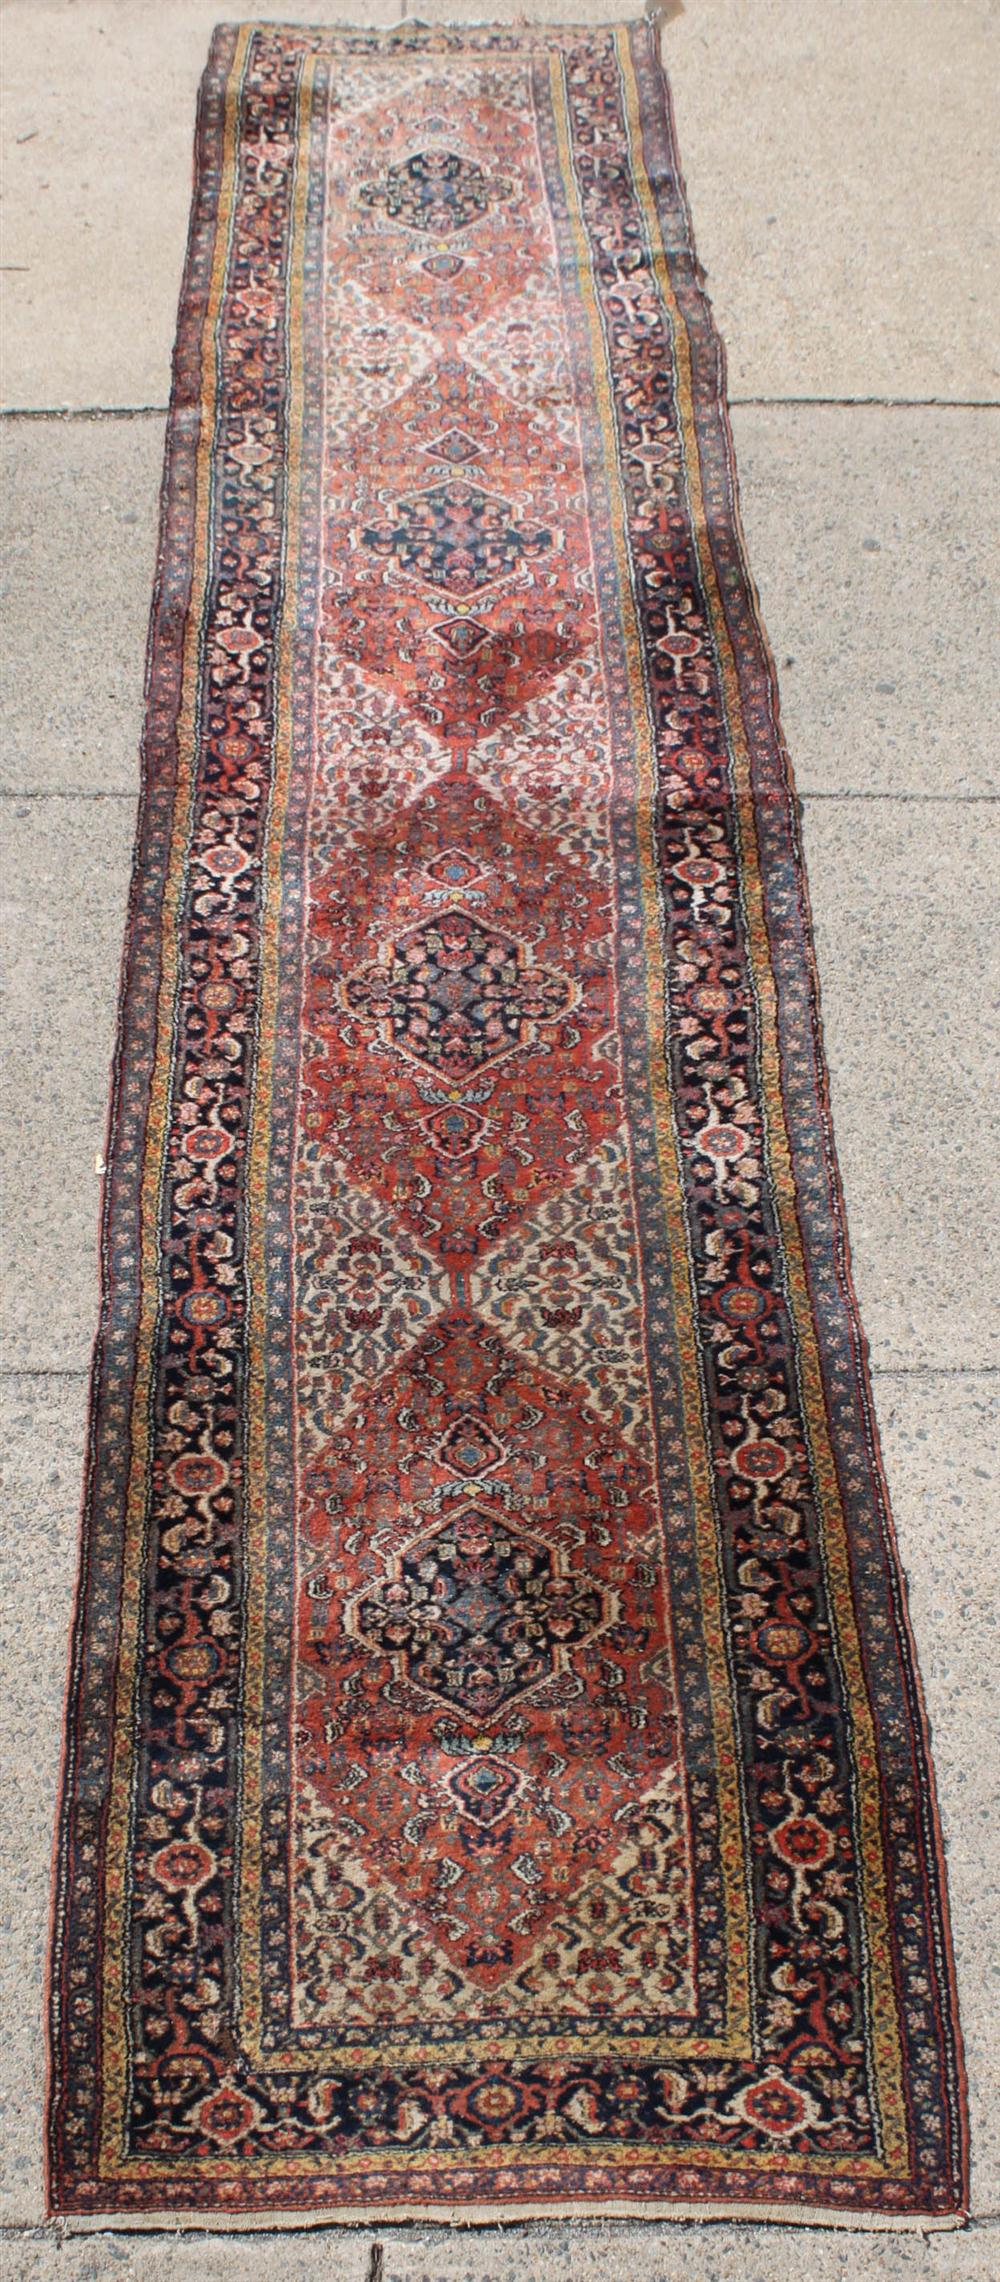 PERSIAN KASHAN RUG with central 145a32